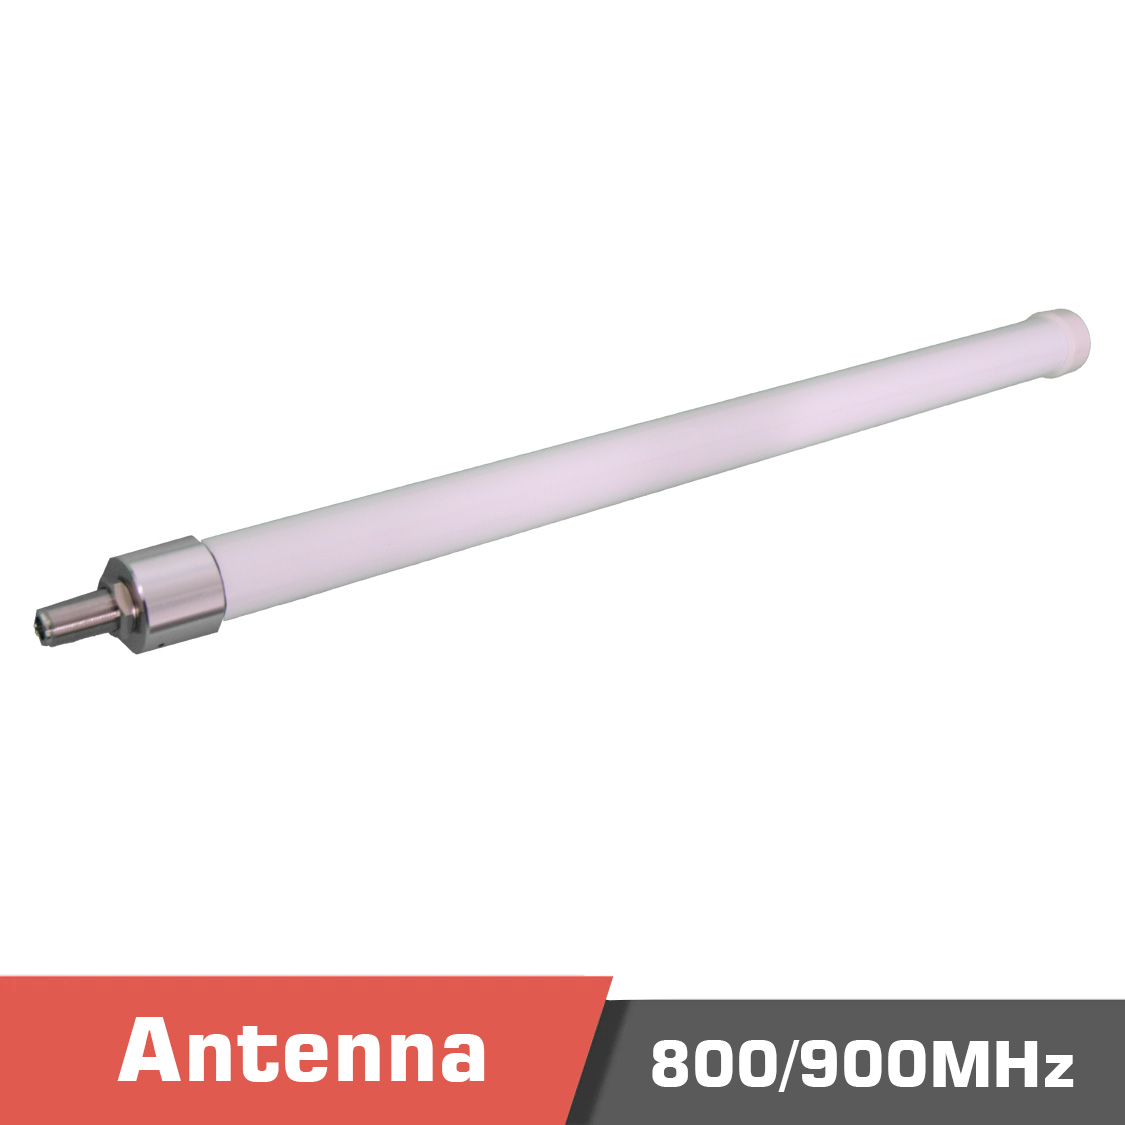 Template. 1 - 400mhz dipole antenna,omnidirectional antenna,dipole antenna,2dbi gain,lpwan/iot/m2m,wireless video links,400mhz,400mhz cellular band applications,ism band,long-range data link,long-range antenna,long-range video link,telemetry,unmanned aerial vehicle,panel antenna,automatic antenna tracker,aat,2dbi omnidirectional antenna - motionew - 1